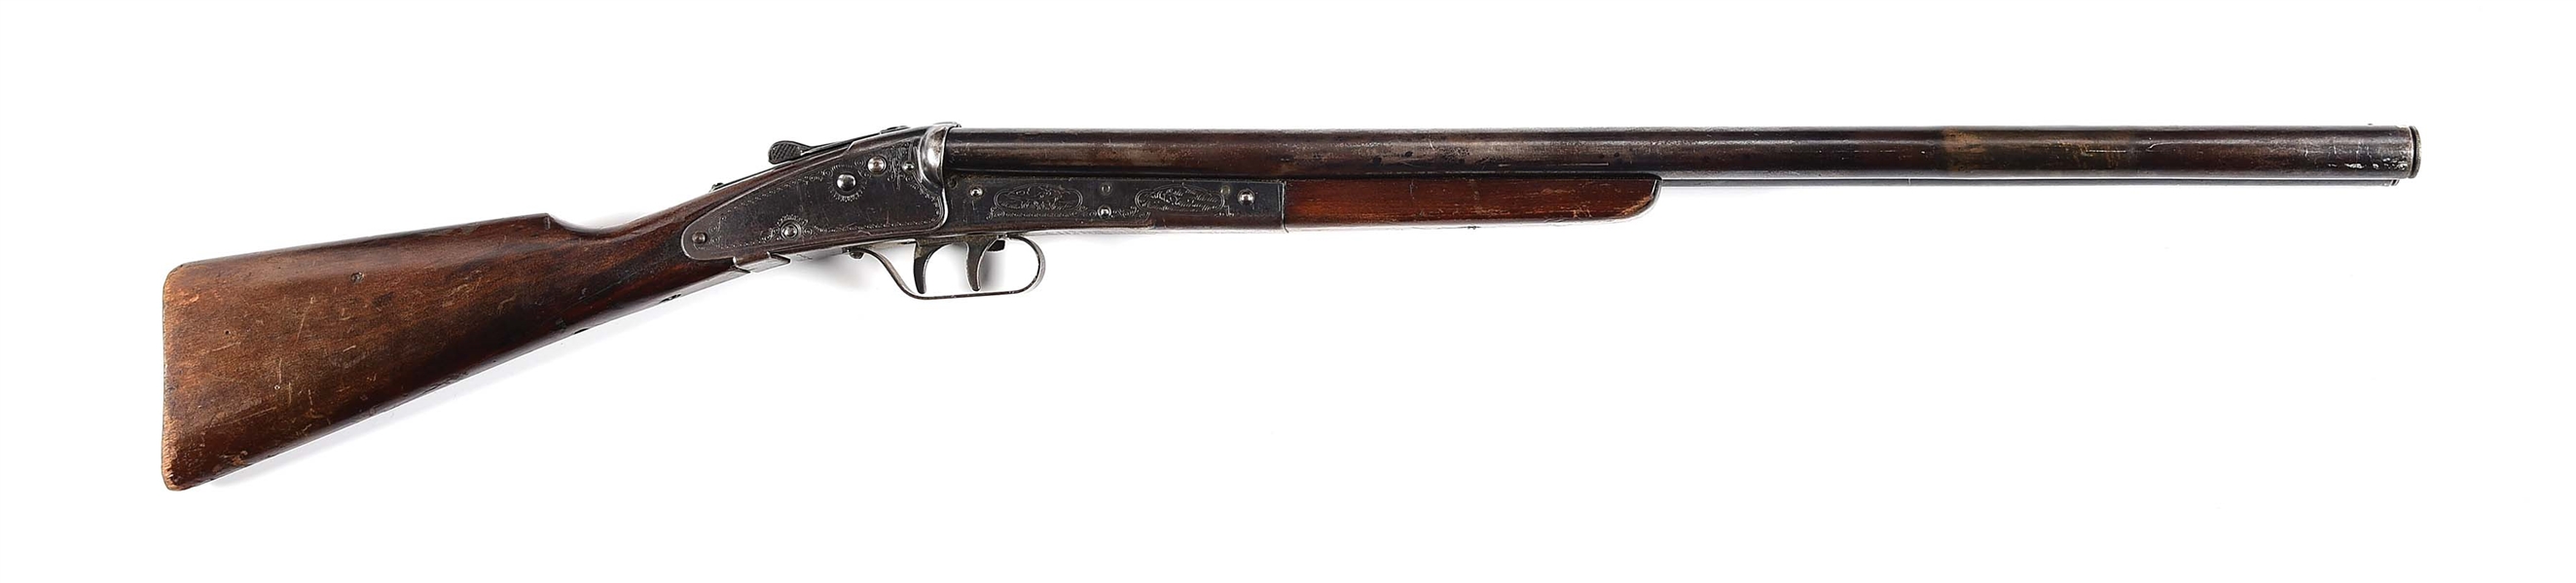 ICONIC DAISY NO. 104 SIDE BY SIDE AIR RIFLE. 